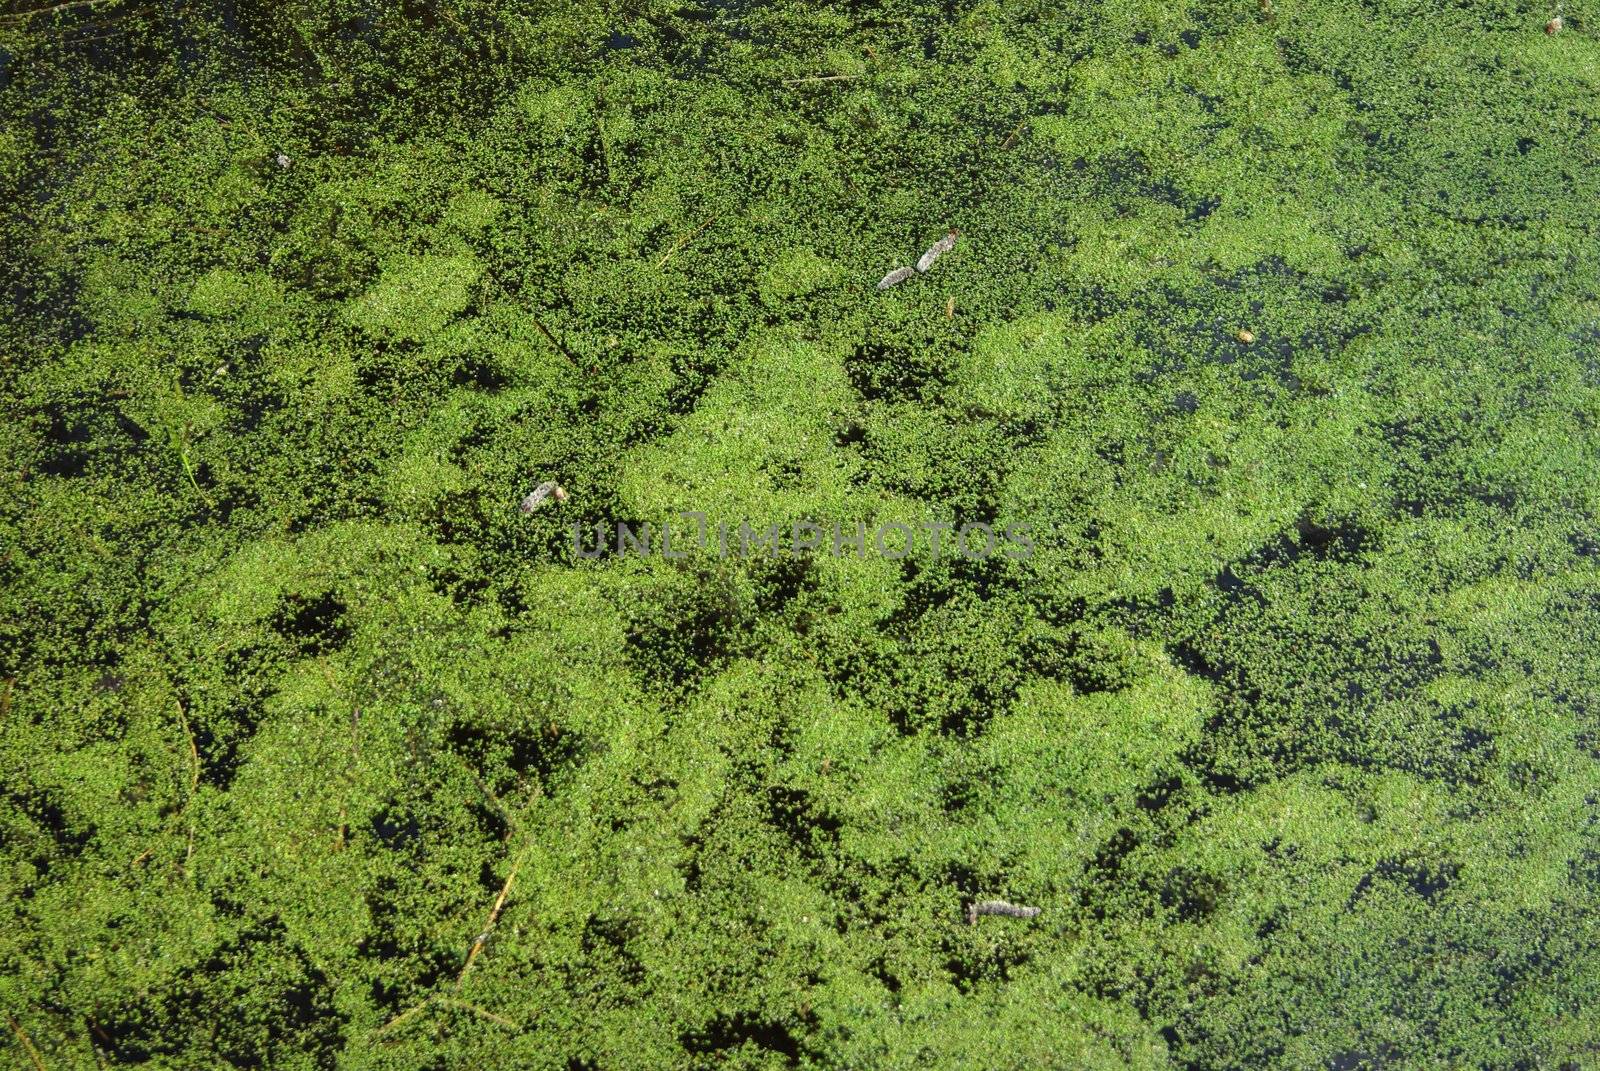 Swamp water with duckweed by Vitamin